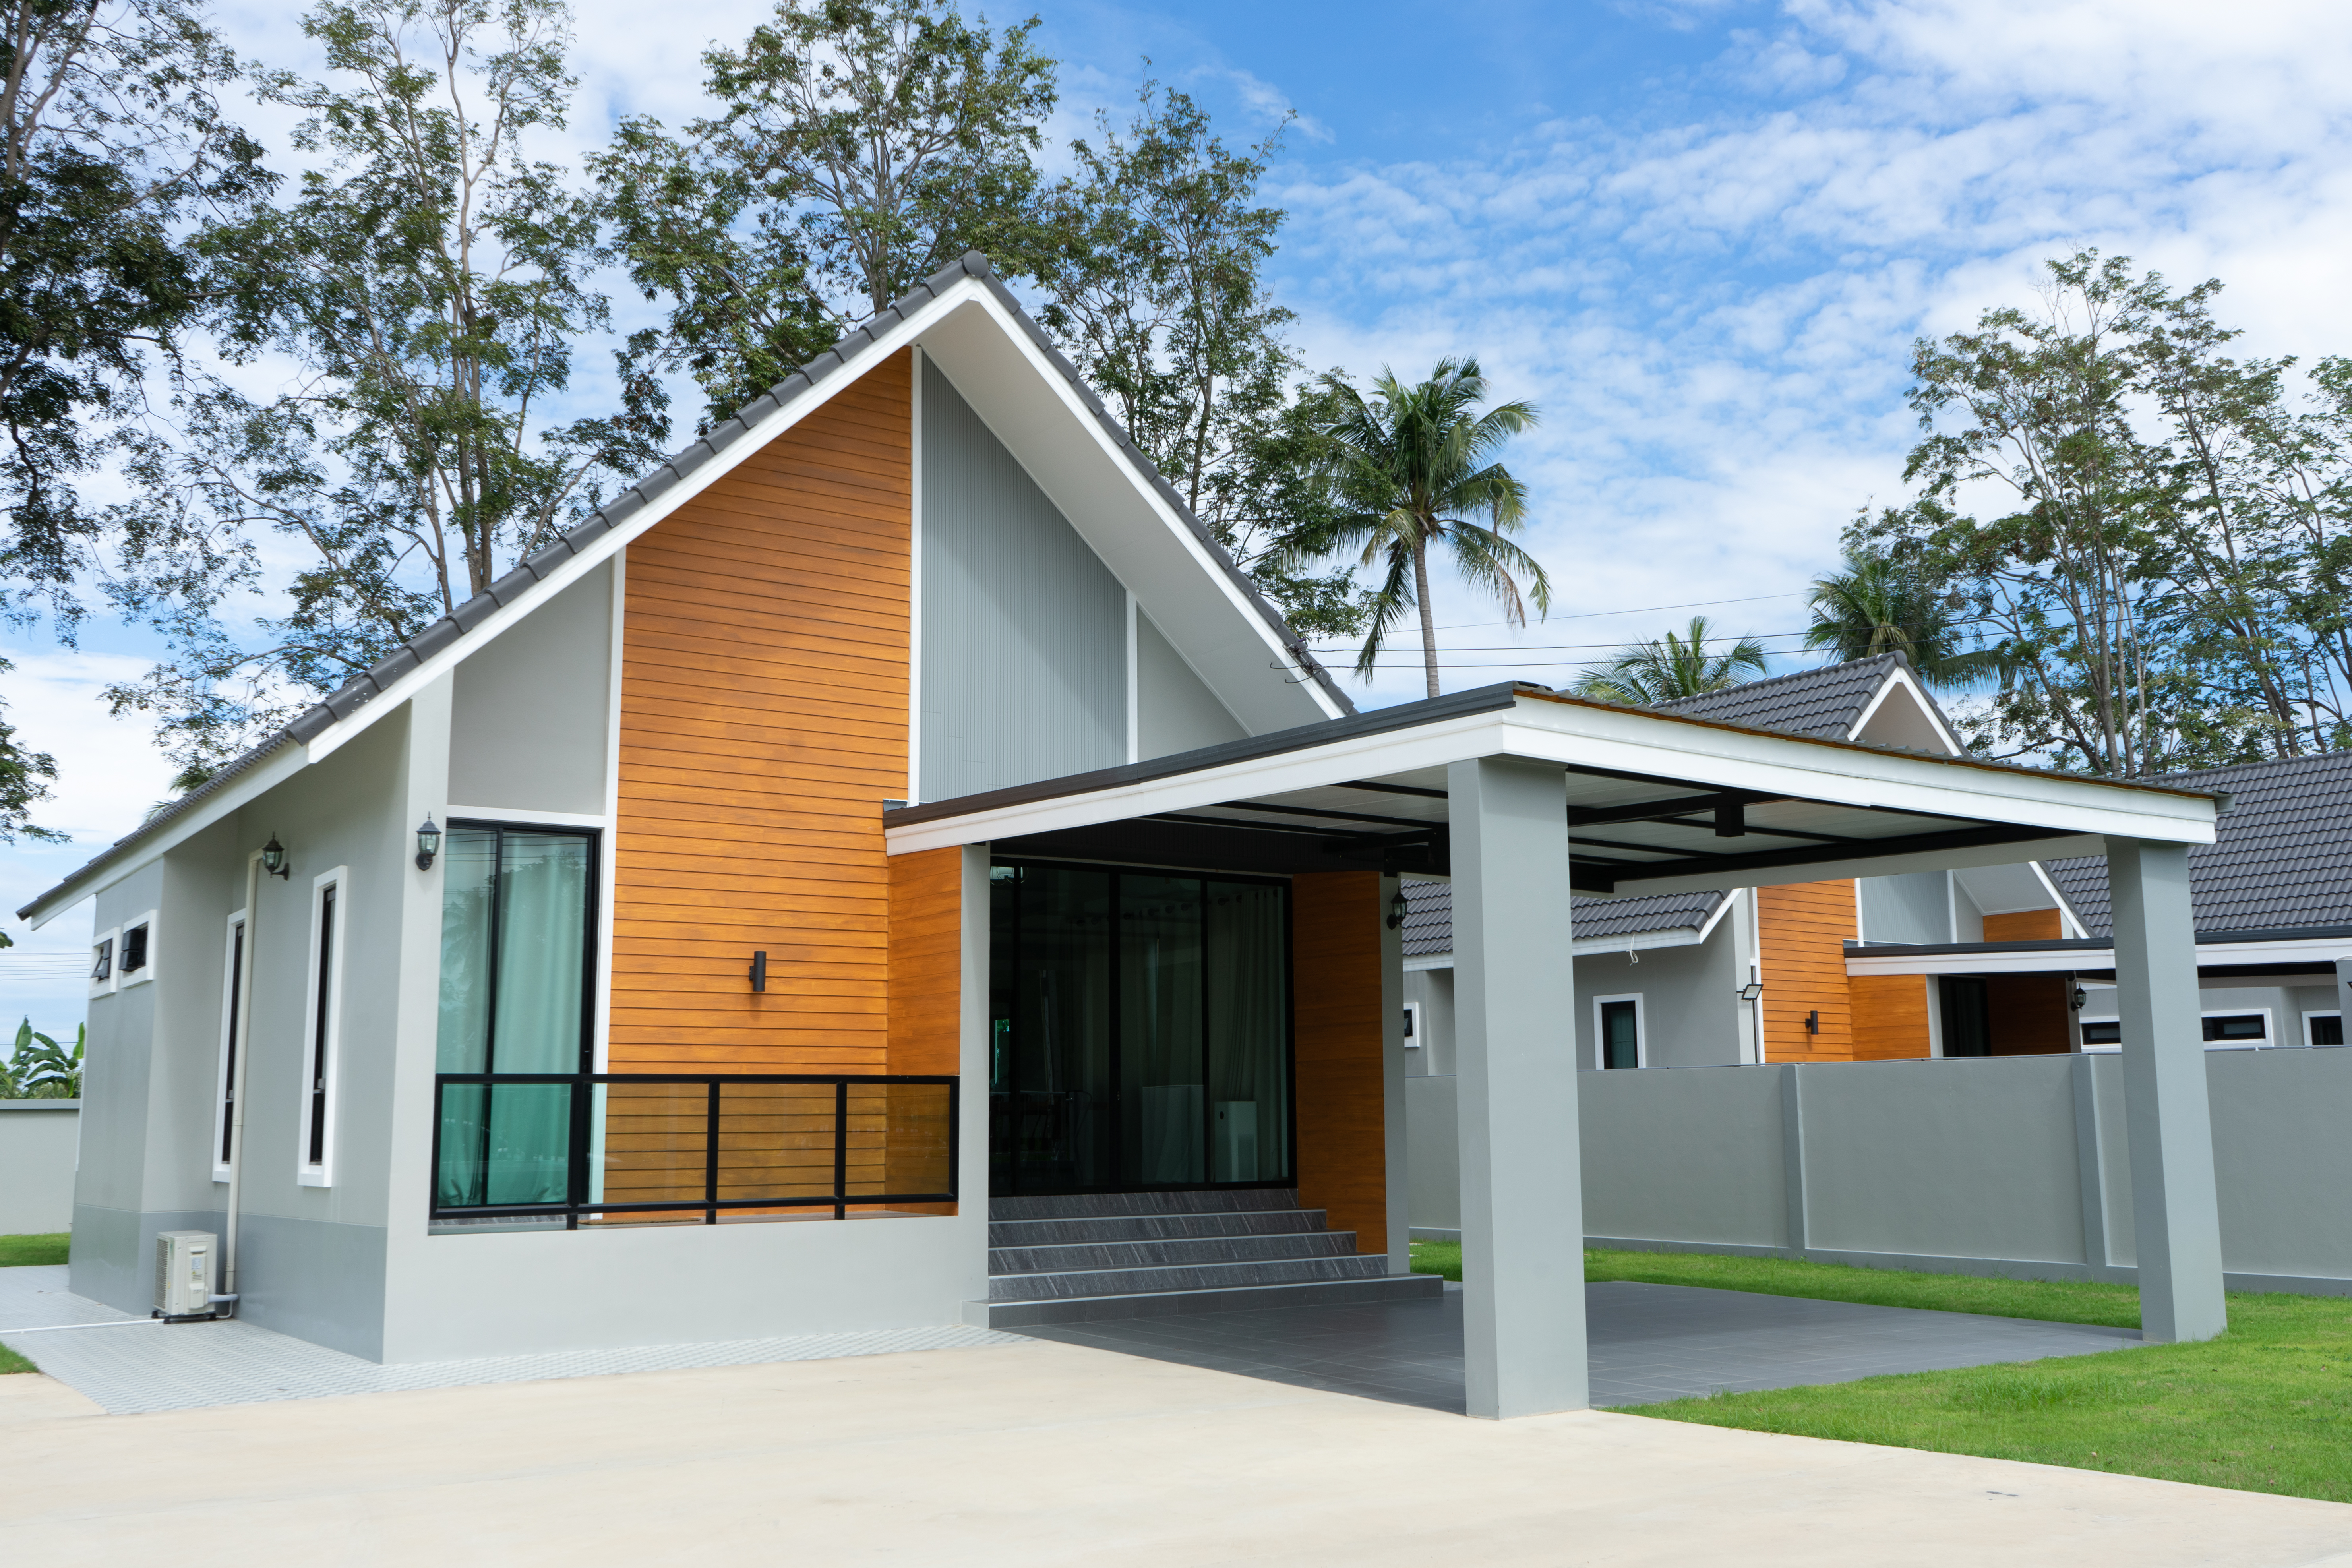 On December 6th, A21 marks a pivotal expansion of the Pattaya Child Advocacy Center (CAC) at its Pattaya location—the sole one of its kind in the regi